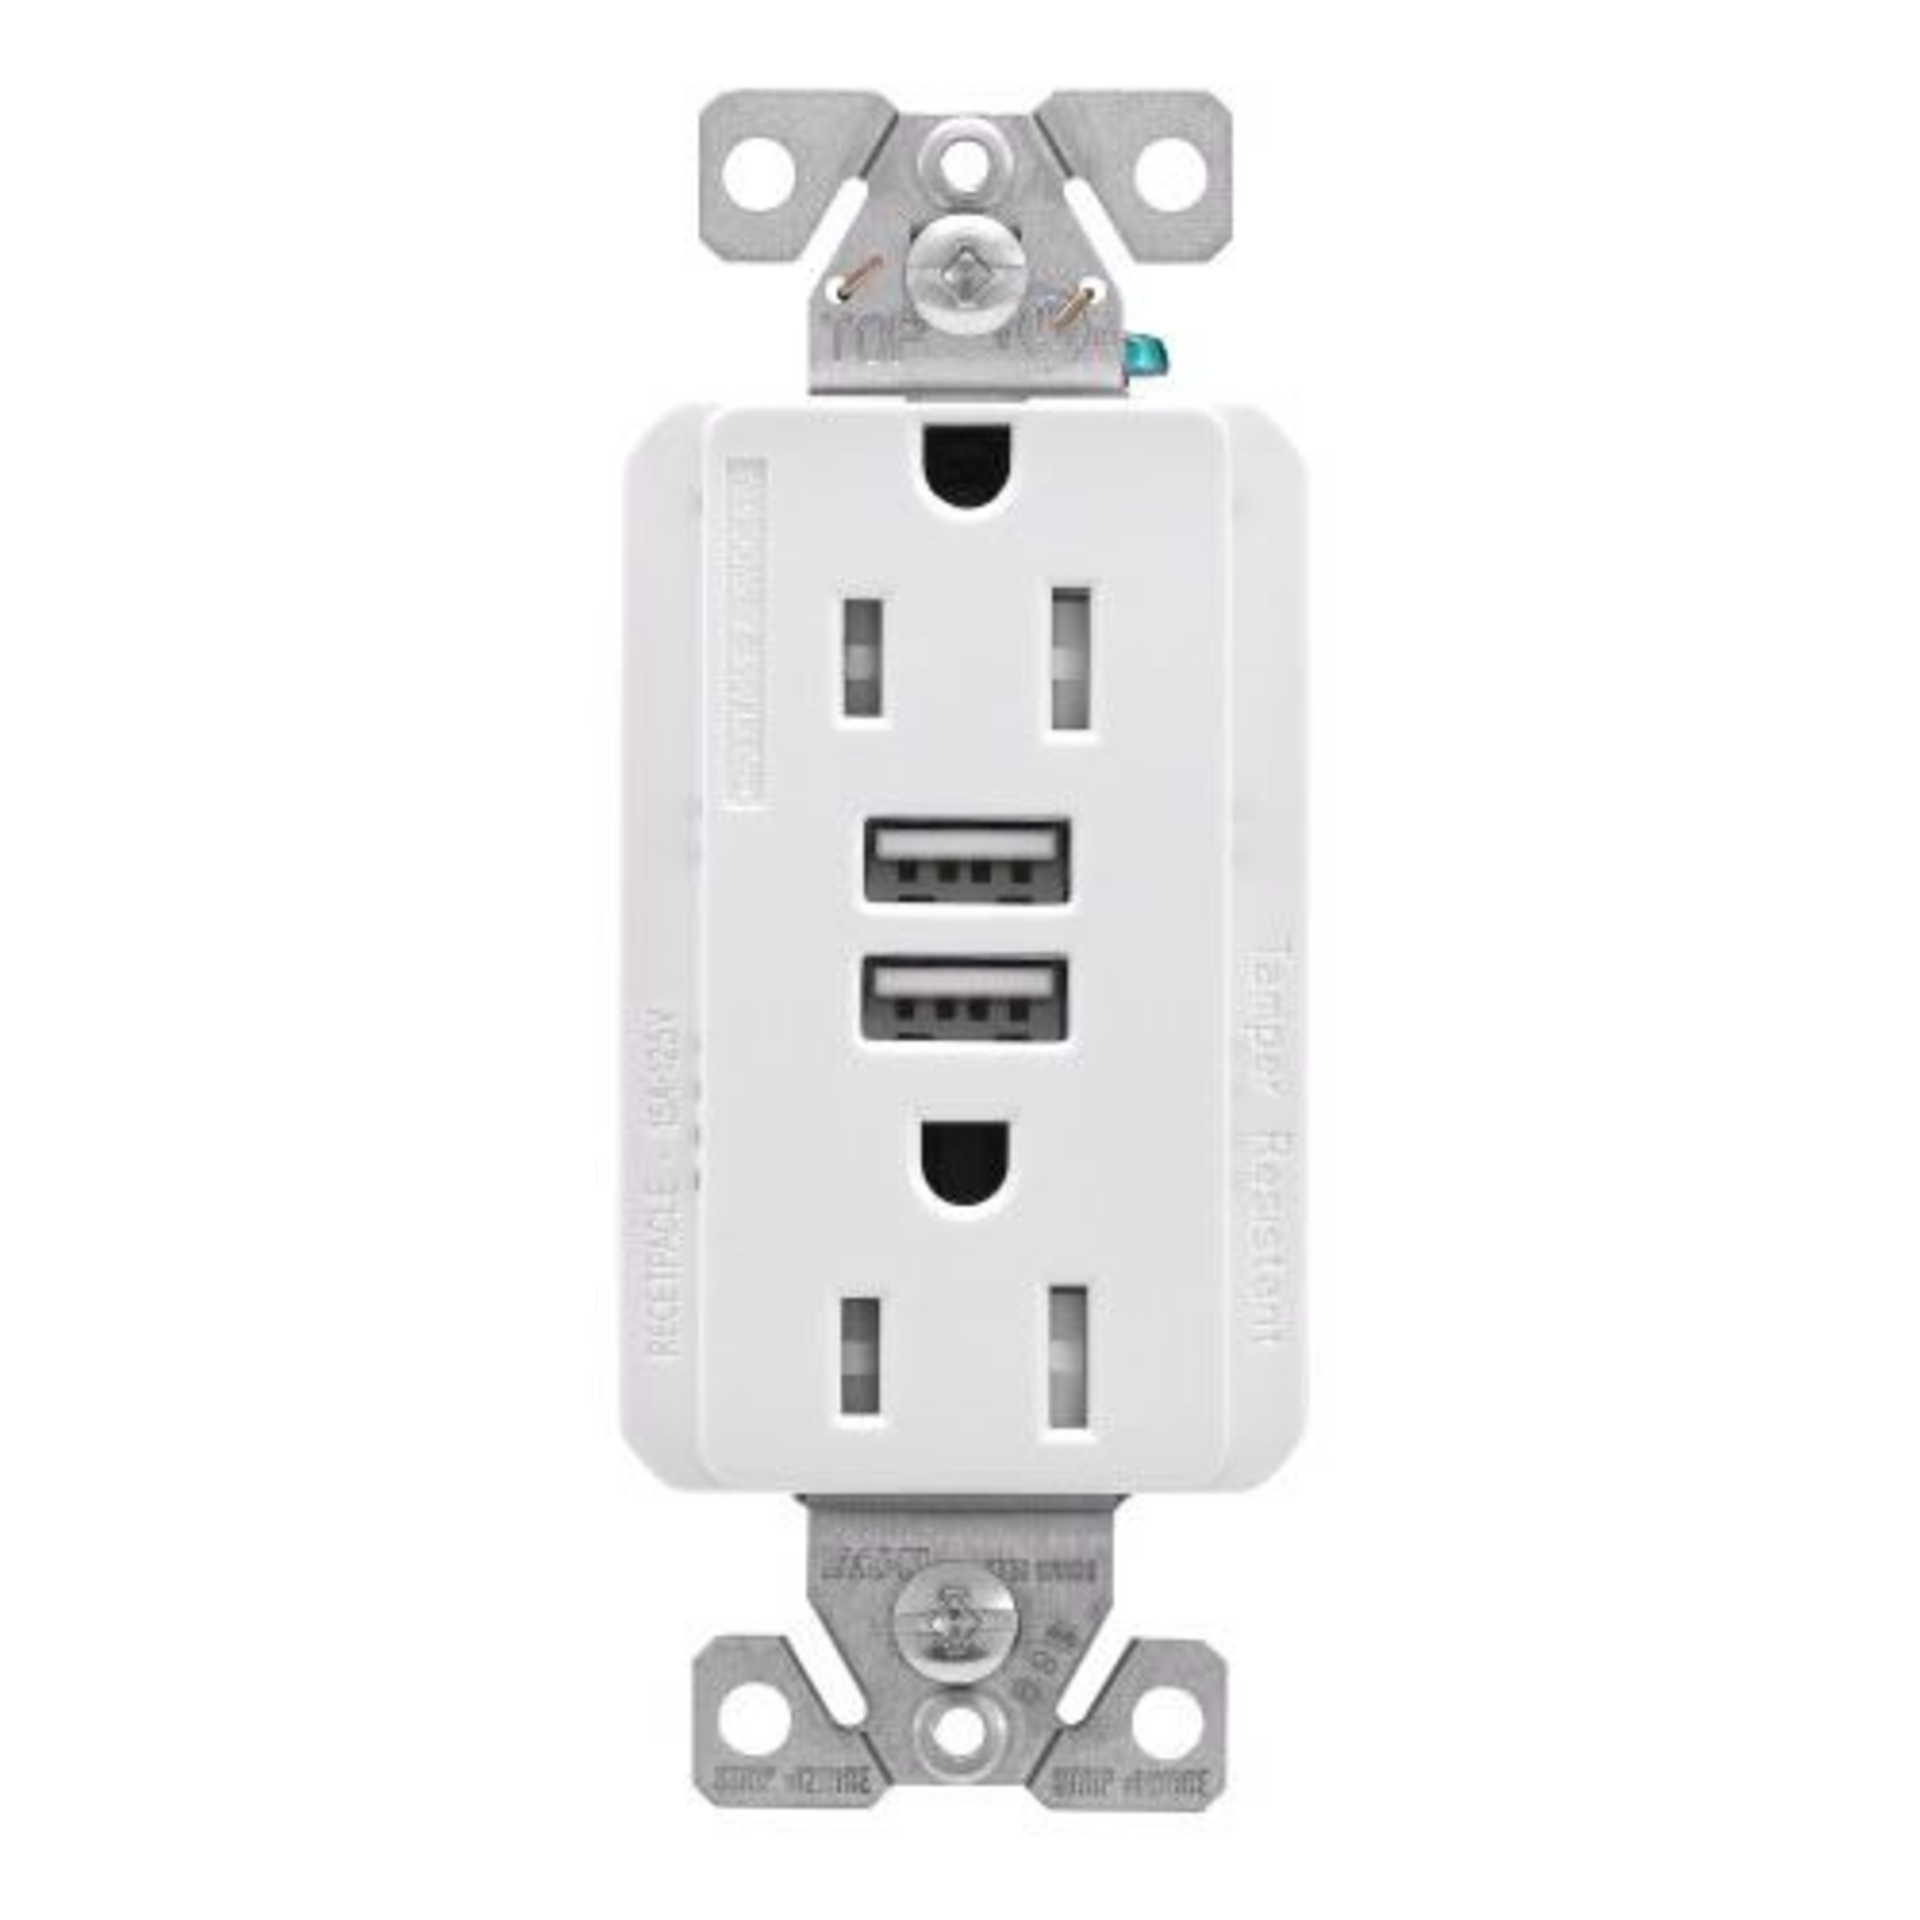 28x Eaton TRUSB5A15W-KB-LW Outlets Combination USB Charger/Duplex Receptacle 15A 125V White EA Tampe